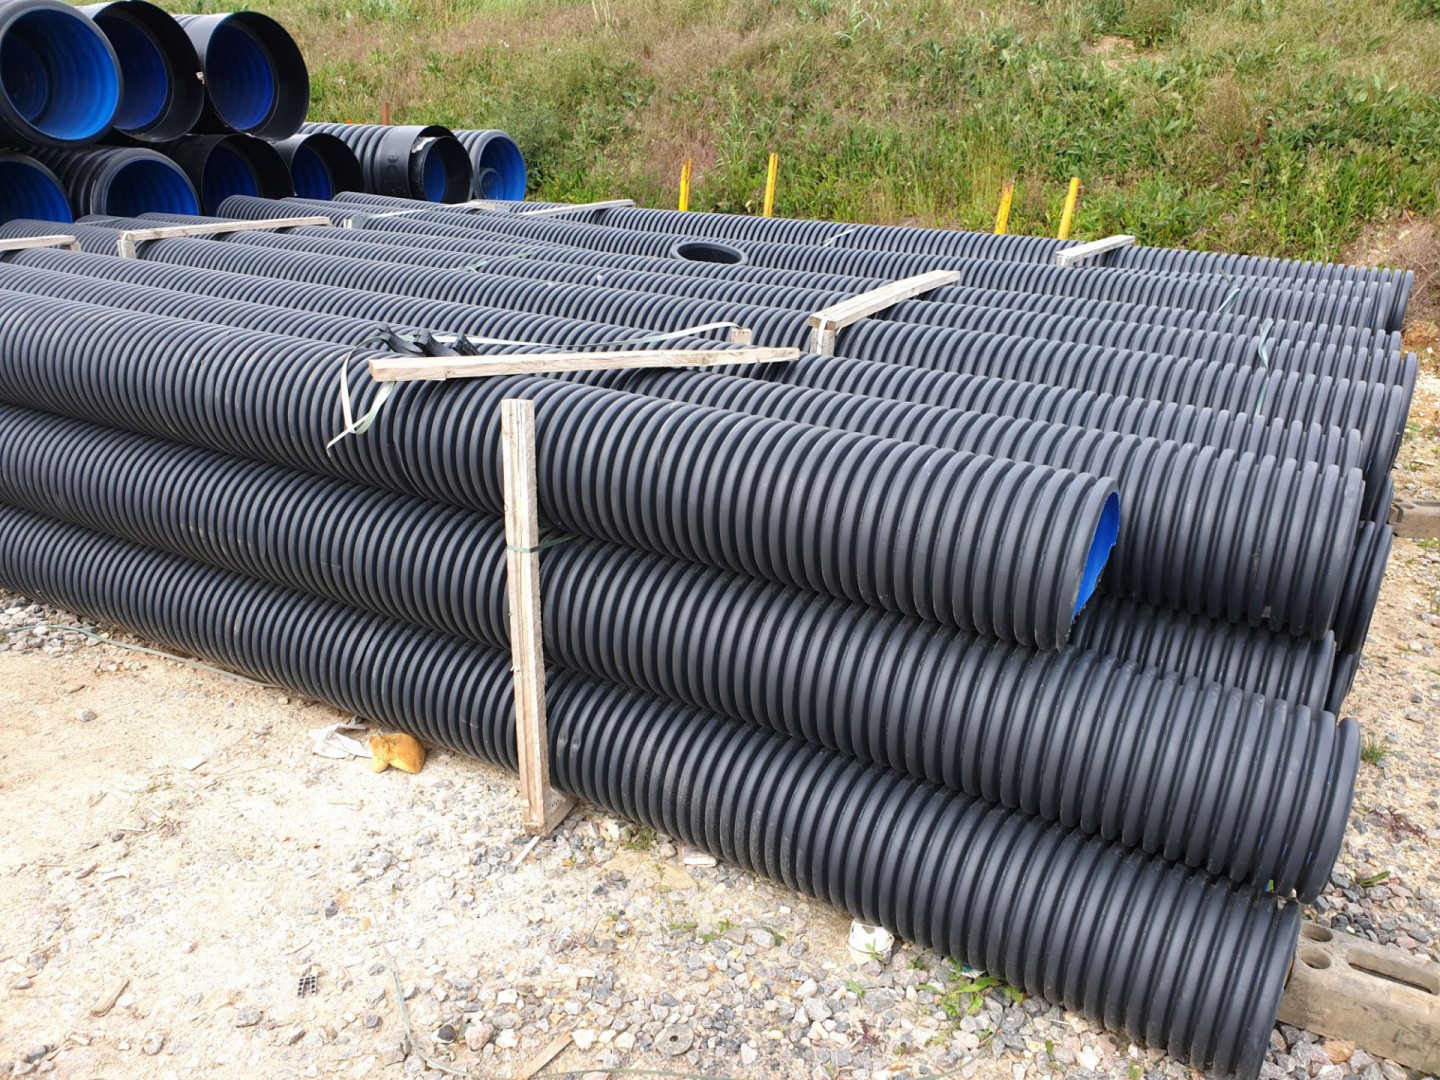 36x Polypipe perforated drain pipe, 300mm dia x 60...